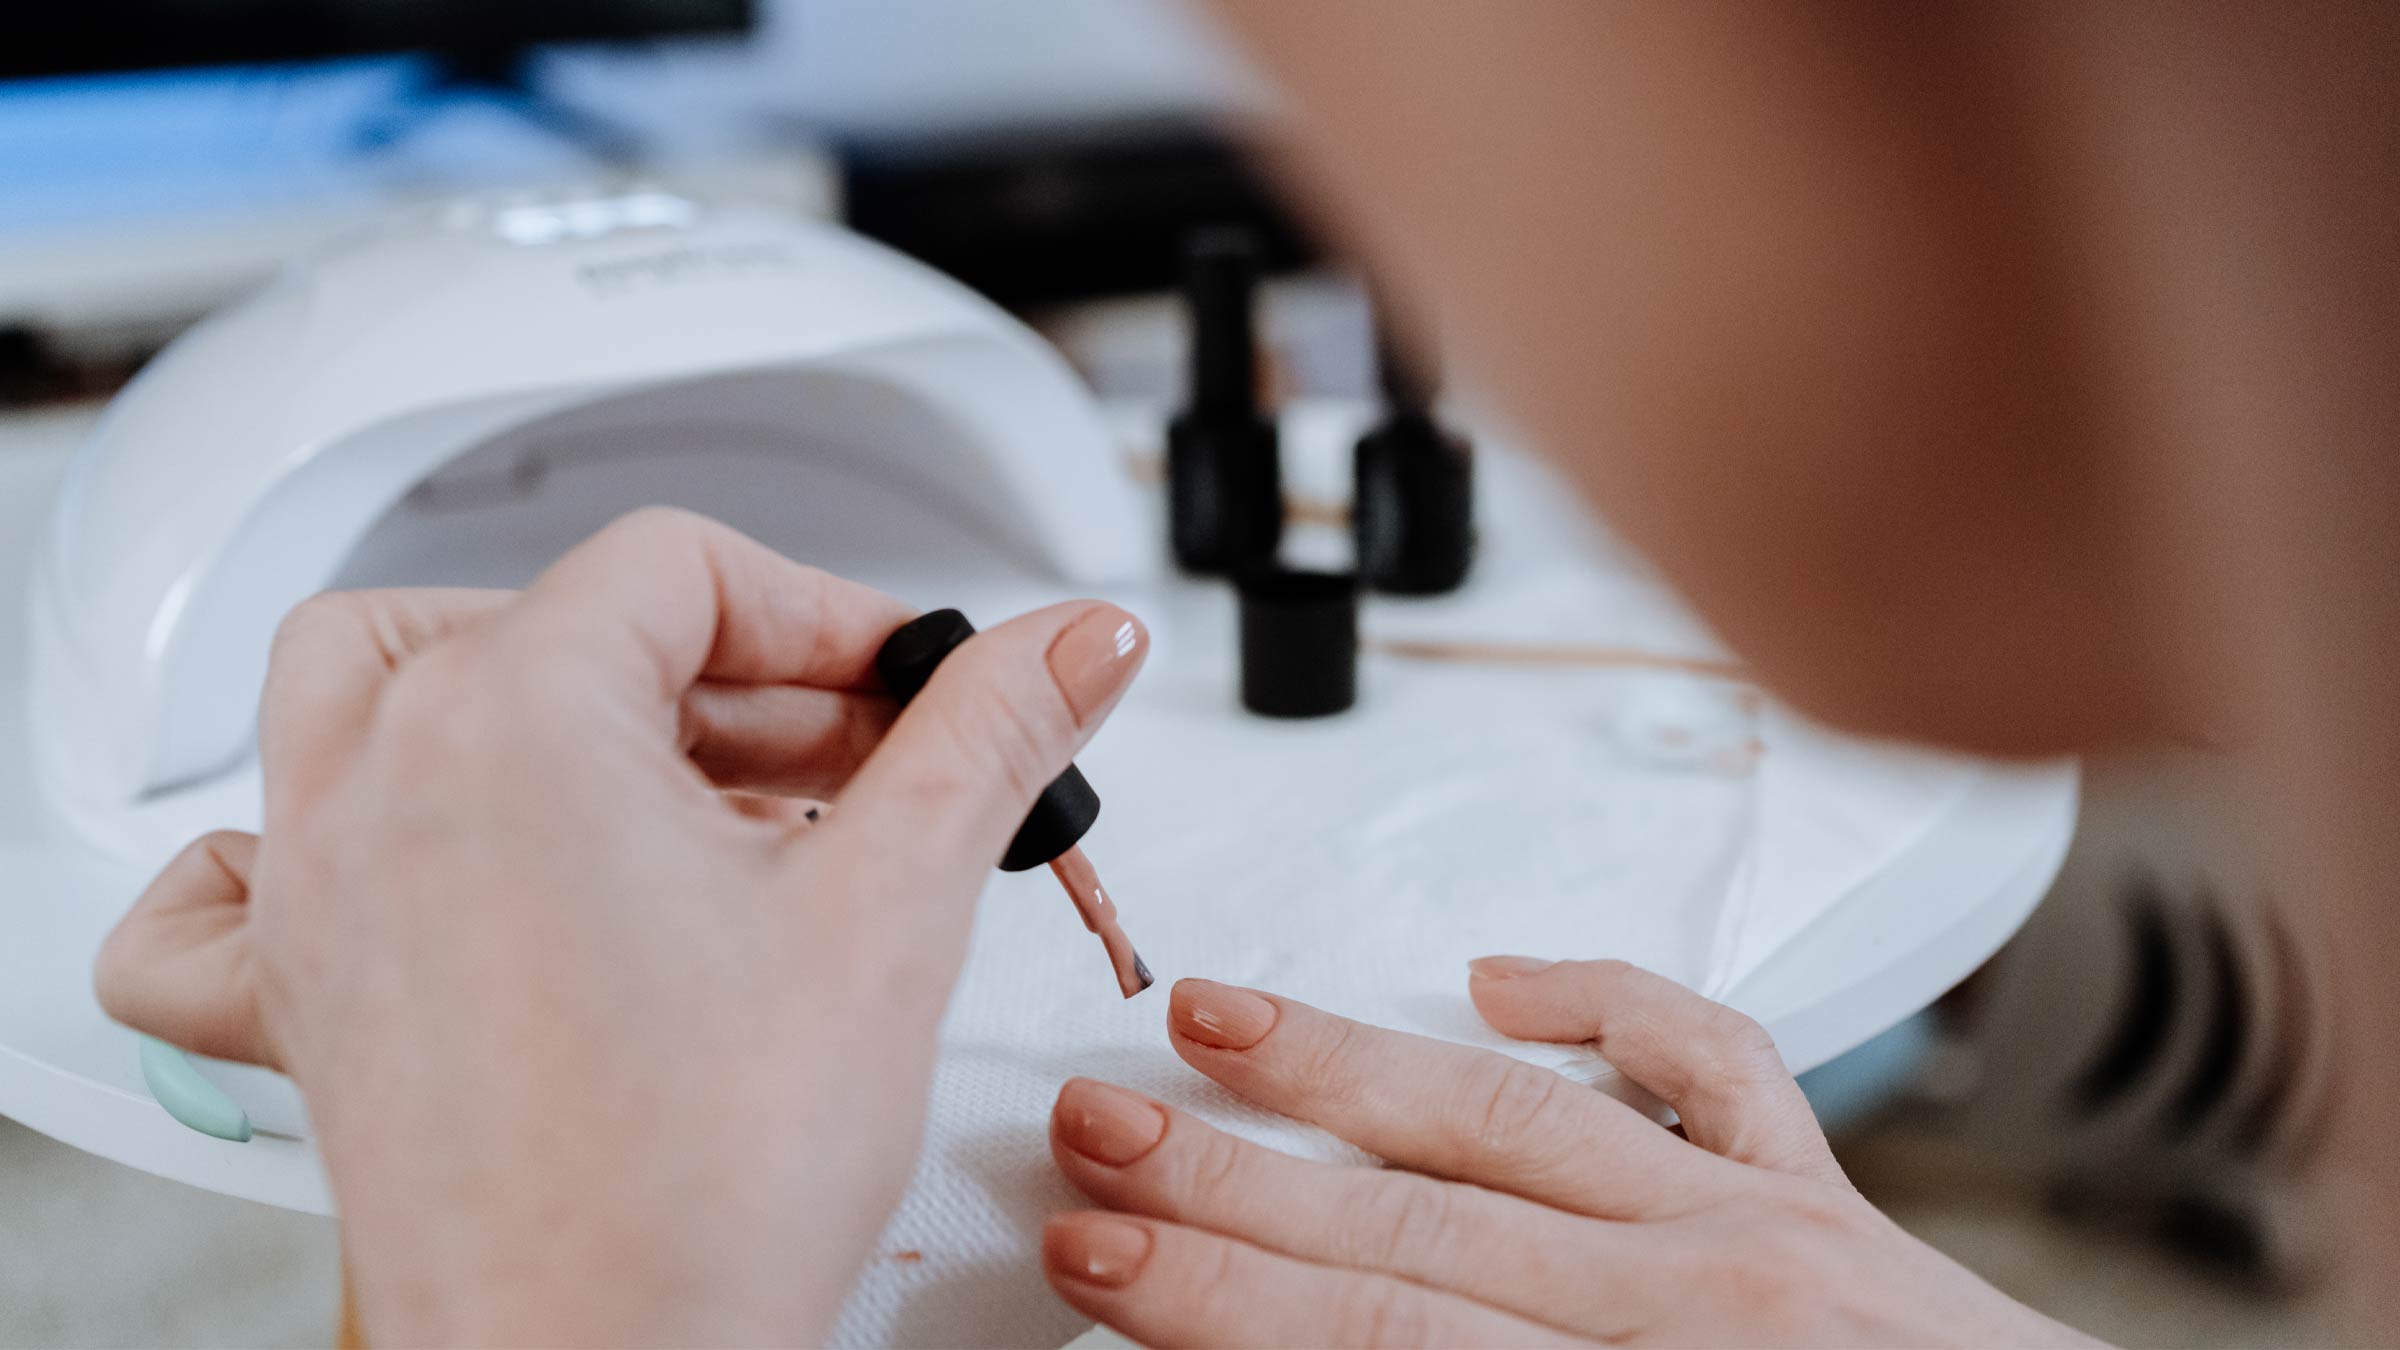 Skin cancer risk from UV nail dryer| Ohio State Health & Discovery